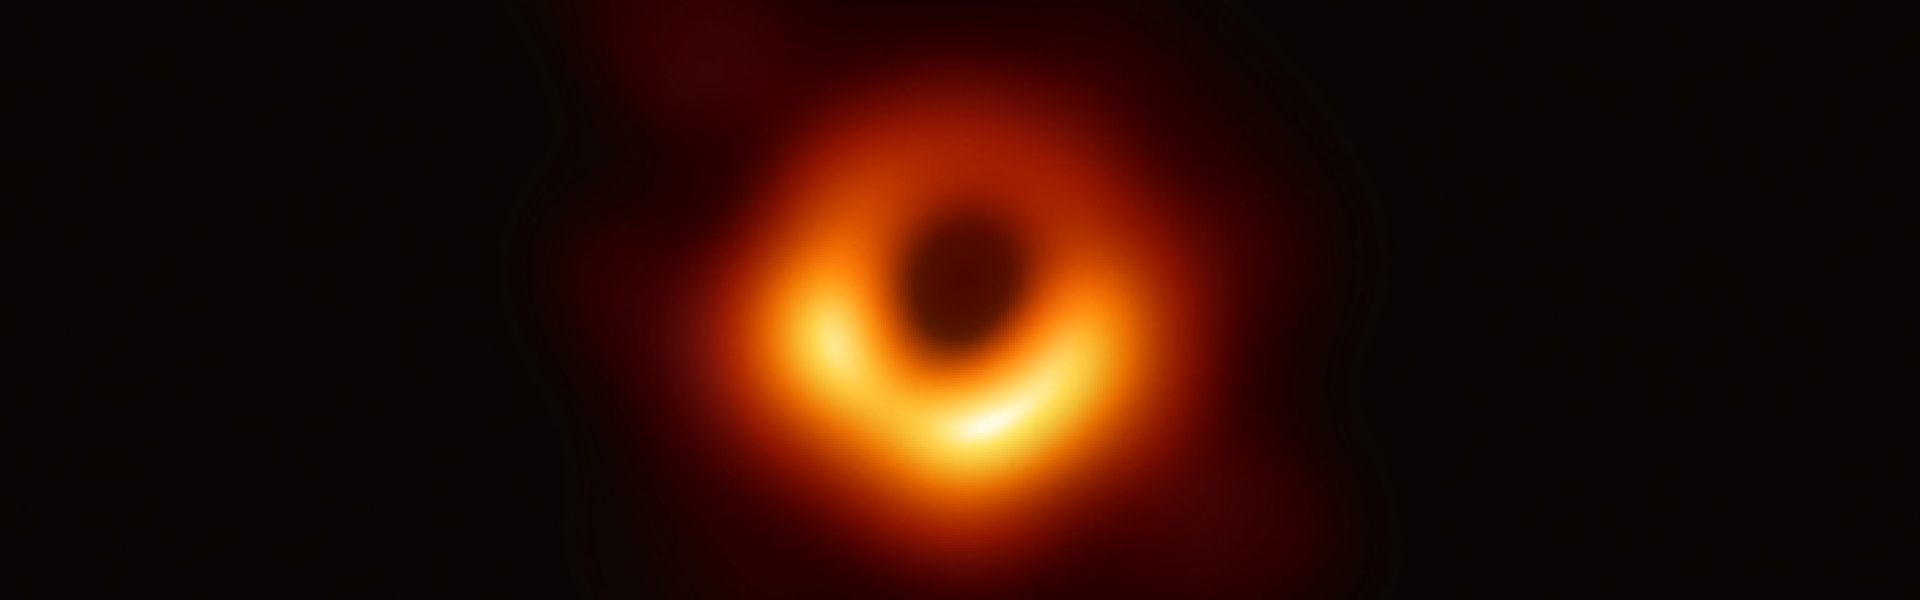 First image of a black hole